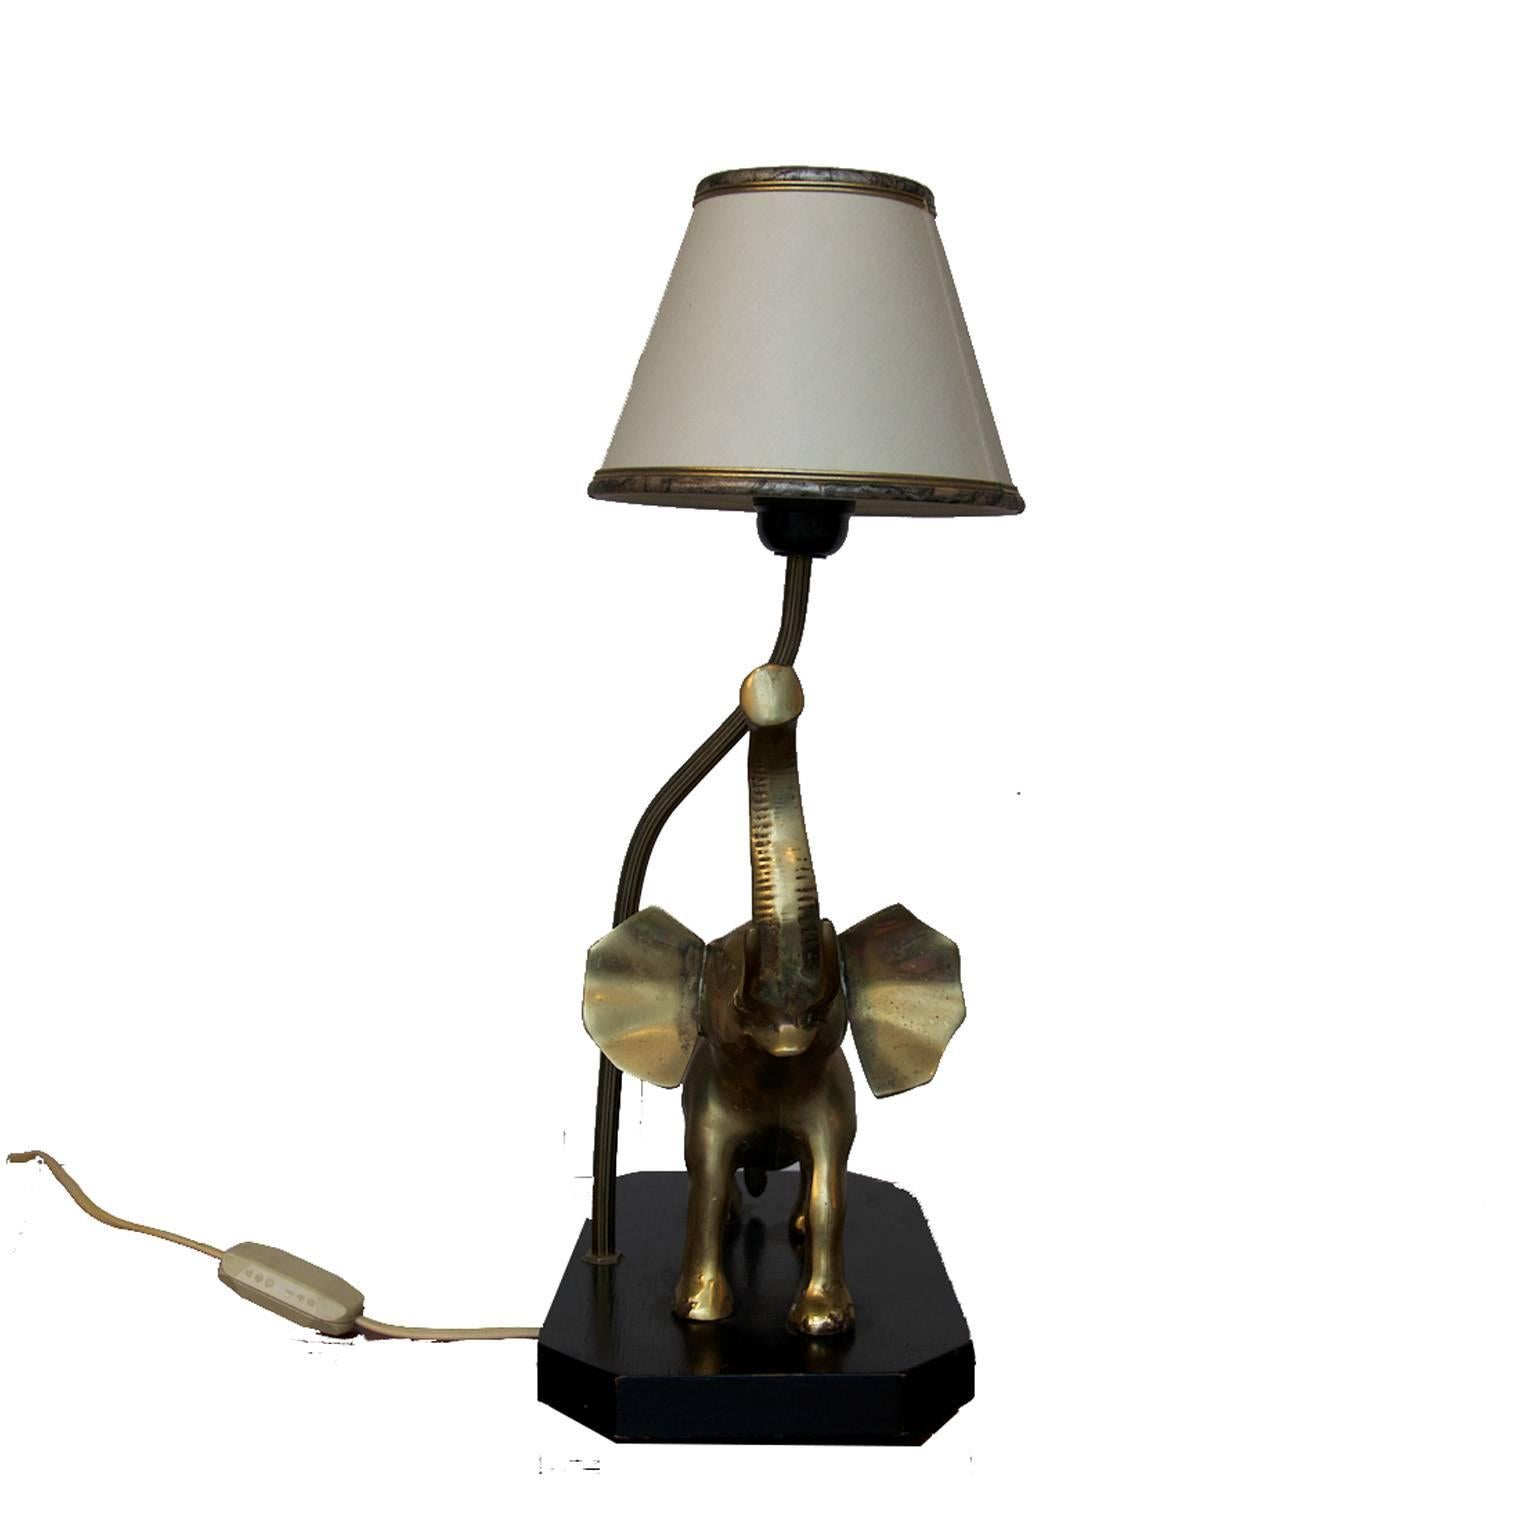 Table lamp with a brass elephant on a black wooden foot. With a off-white lampshade.

All our lights are checked and tested. Because of the lower voltage standard in the USA (110v vs 220v), European lighting can be safely used in the USA. If a